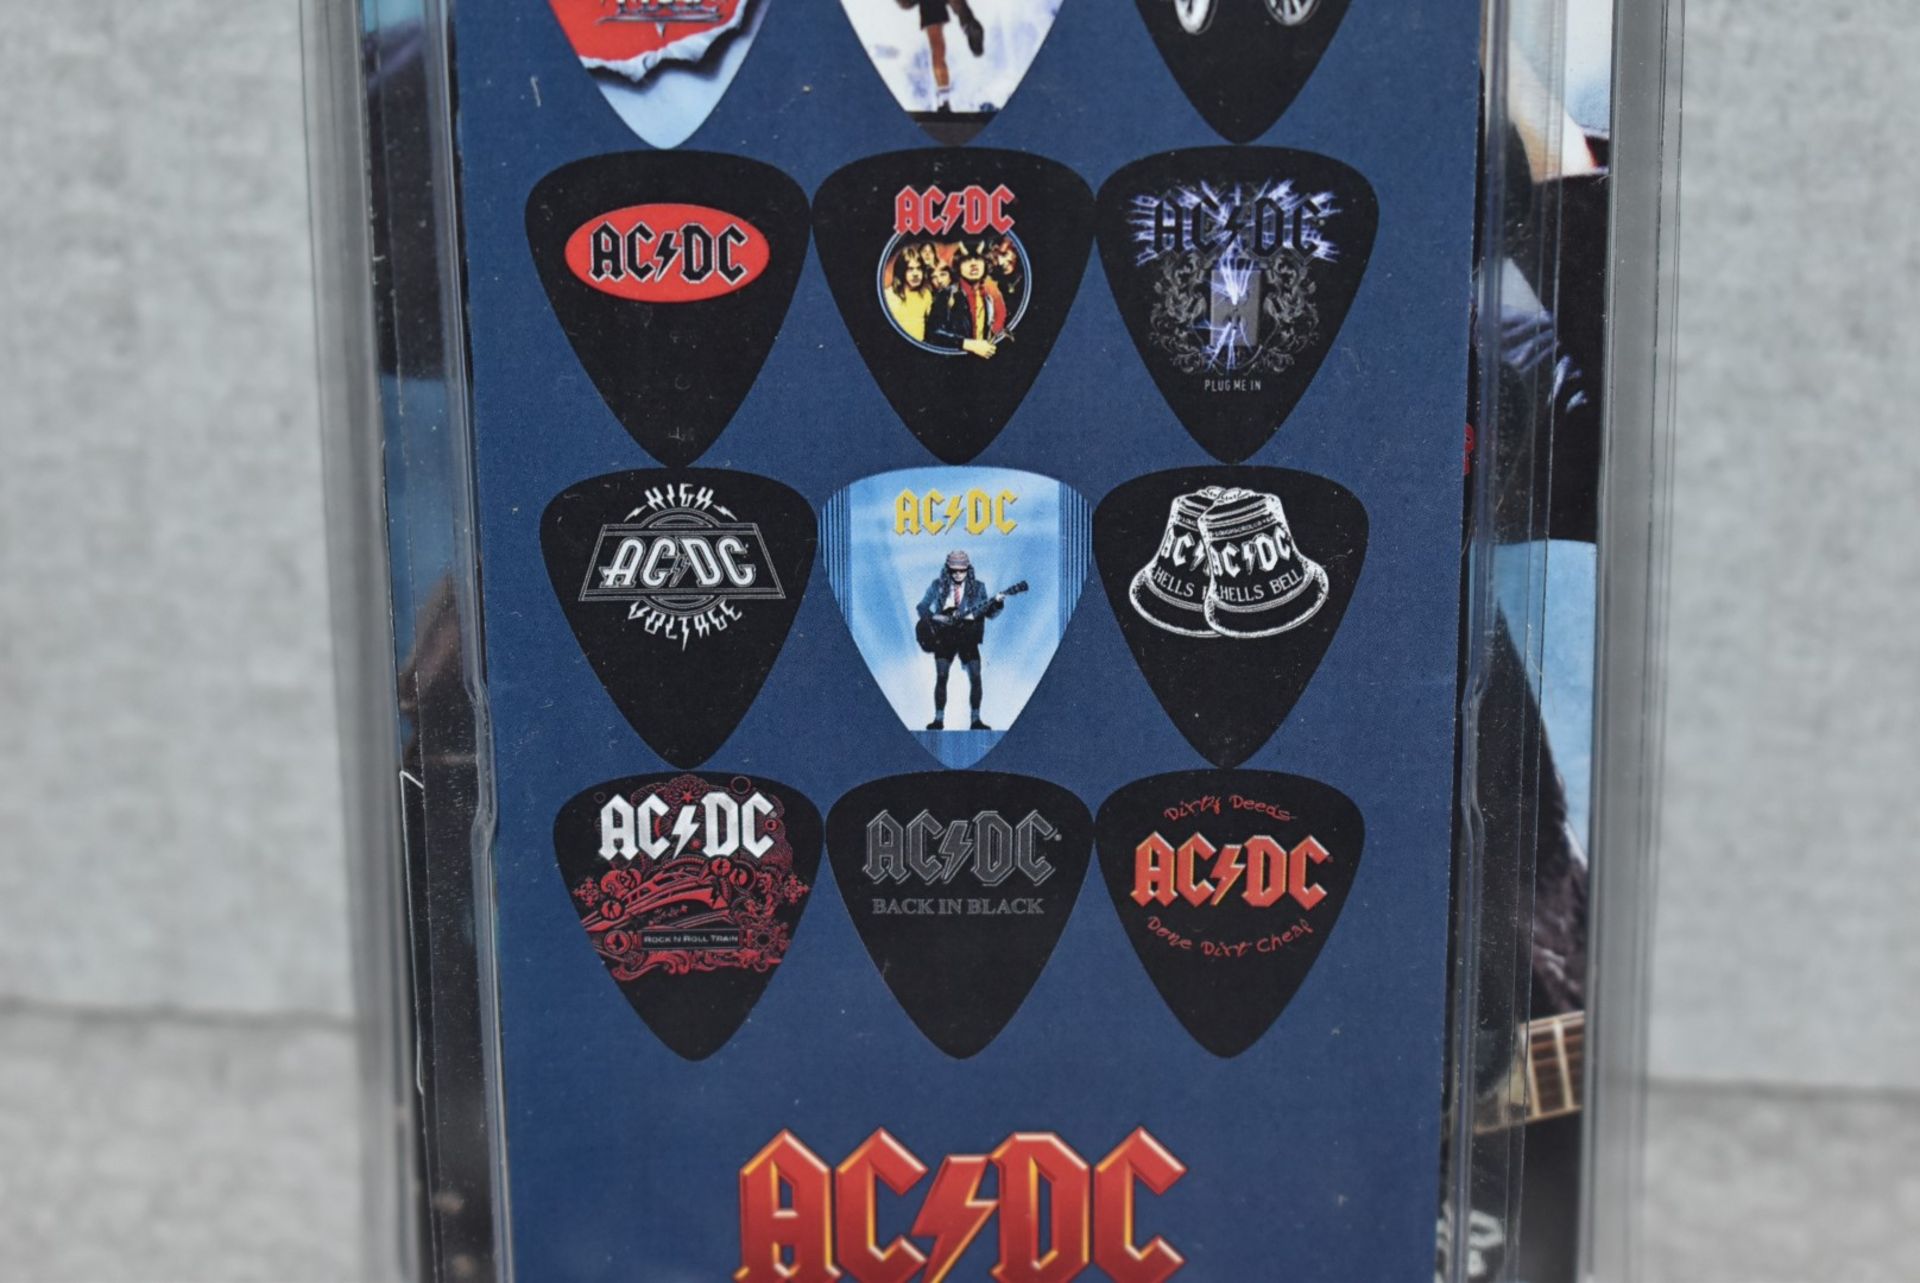 10 x ACDC Guitar Pick Multipacks By Perri's - 6 Picks Per Pack - Officially Licensed Merchandise - - Image 4 of 8